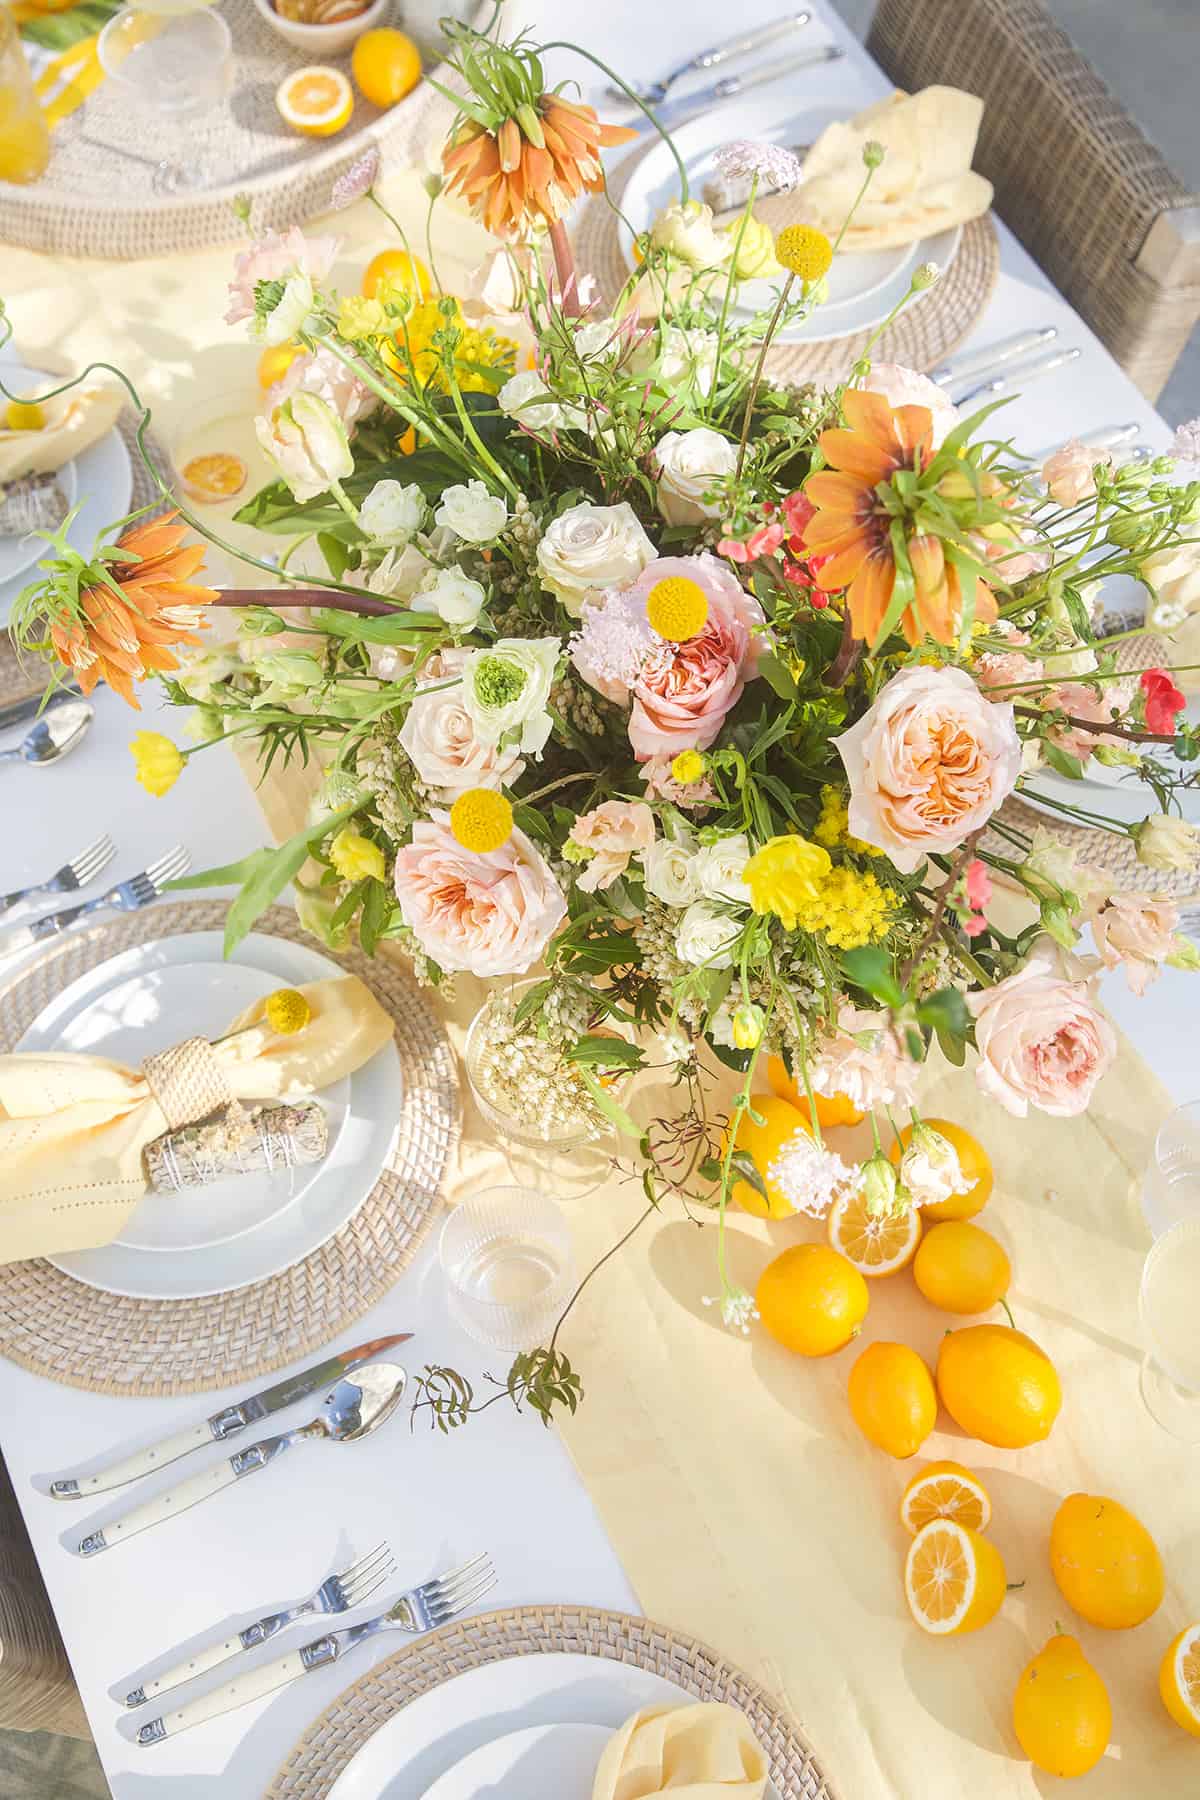 Lemon themed table setting with lemons and flowers.